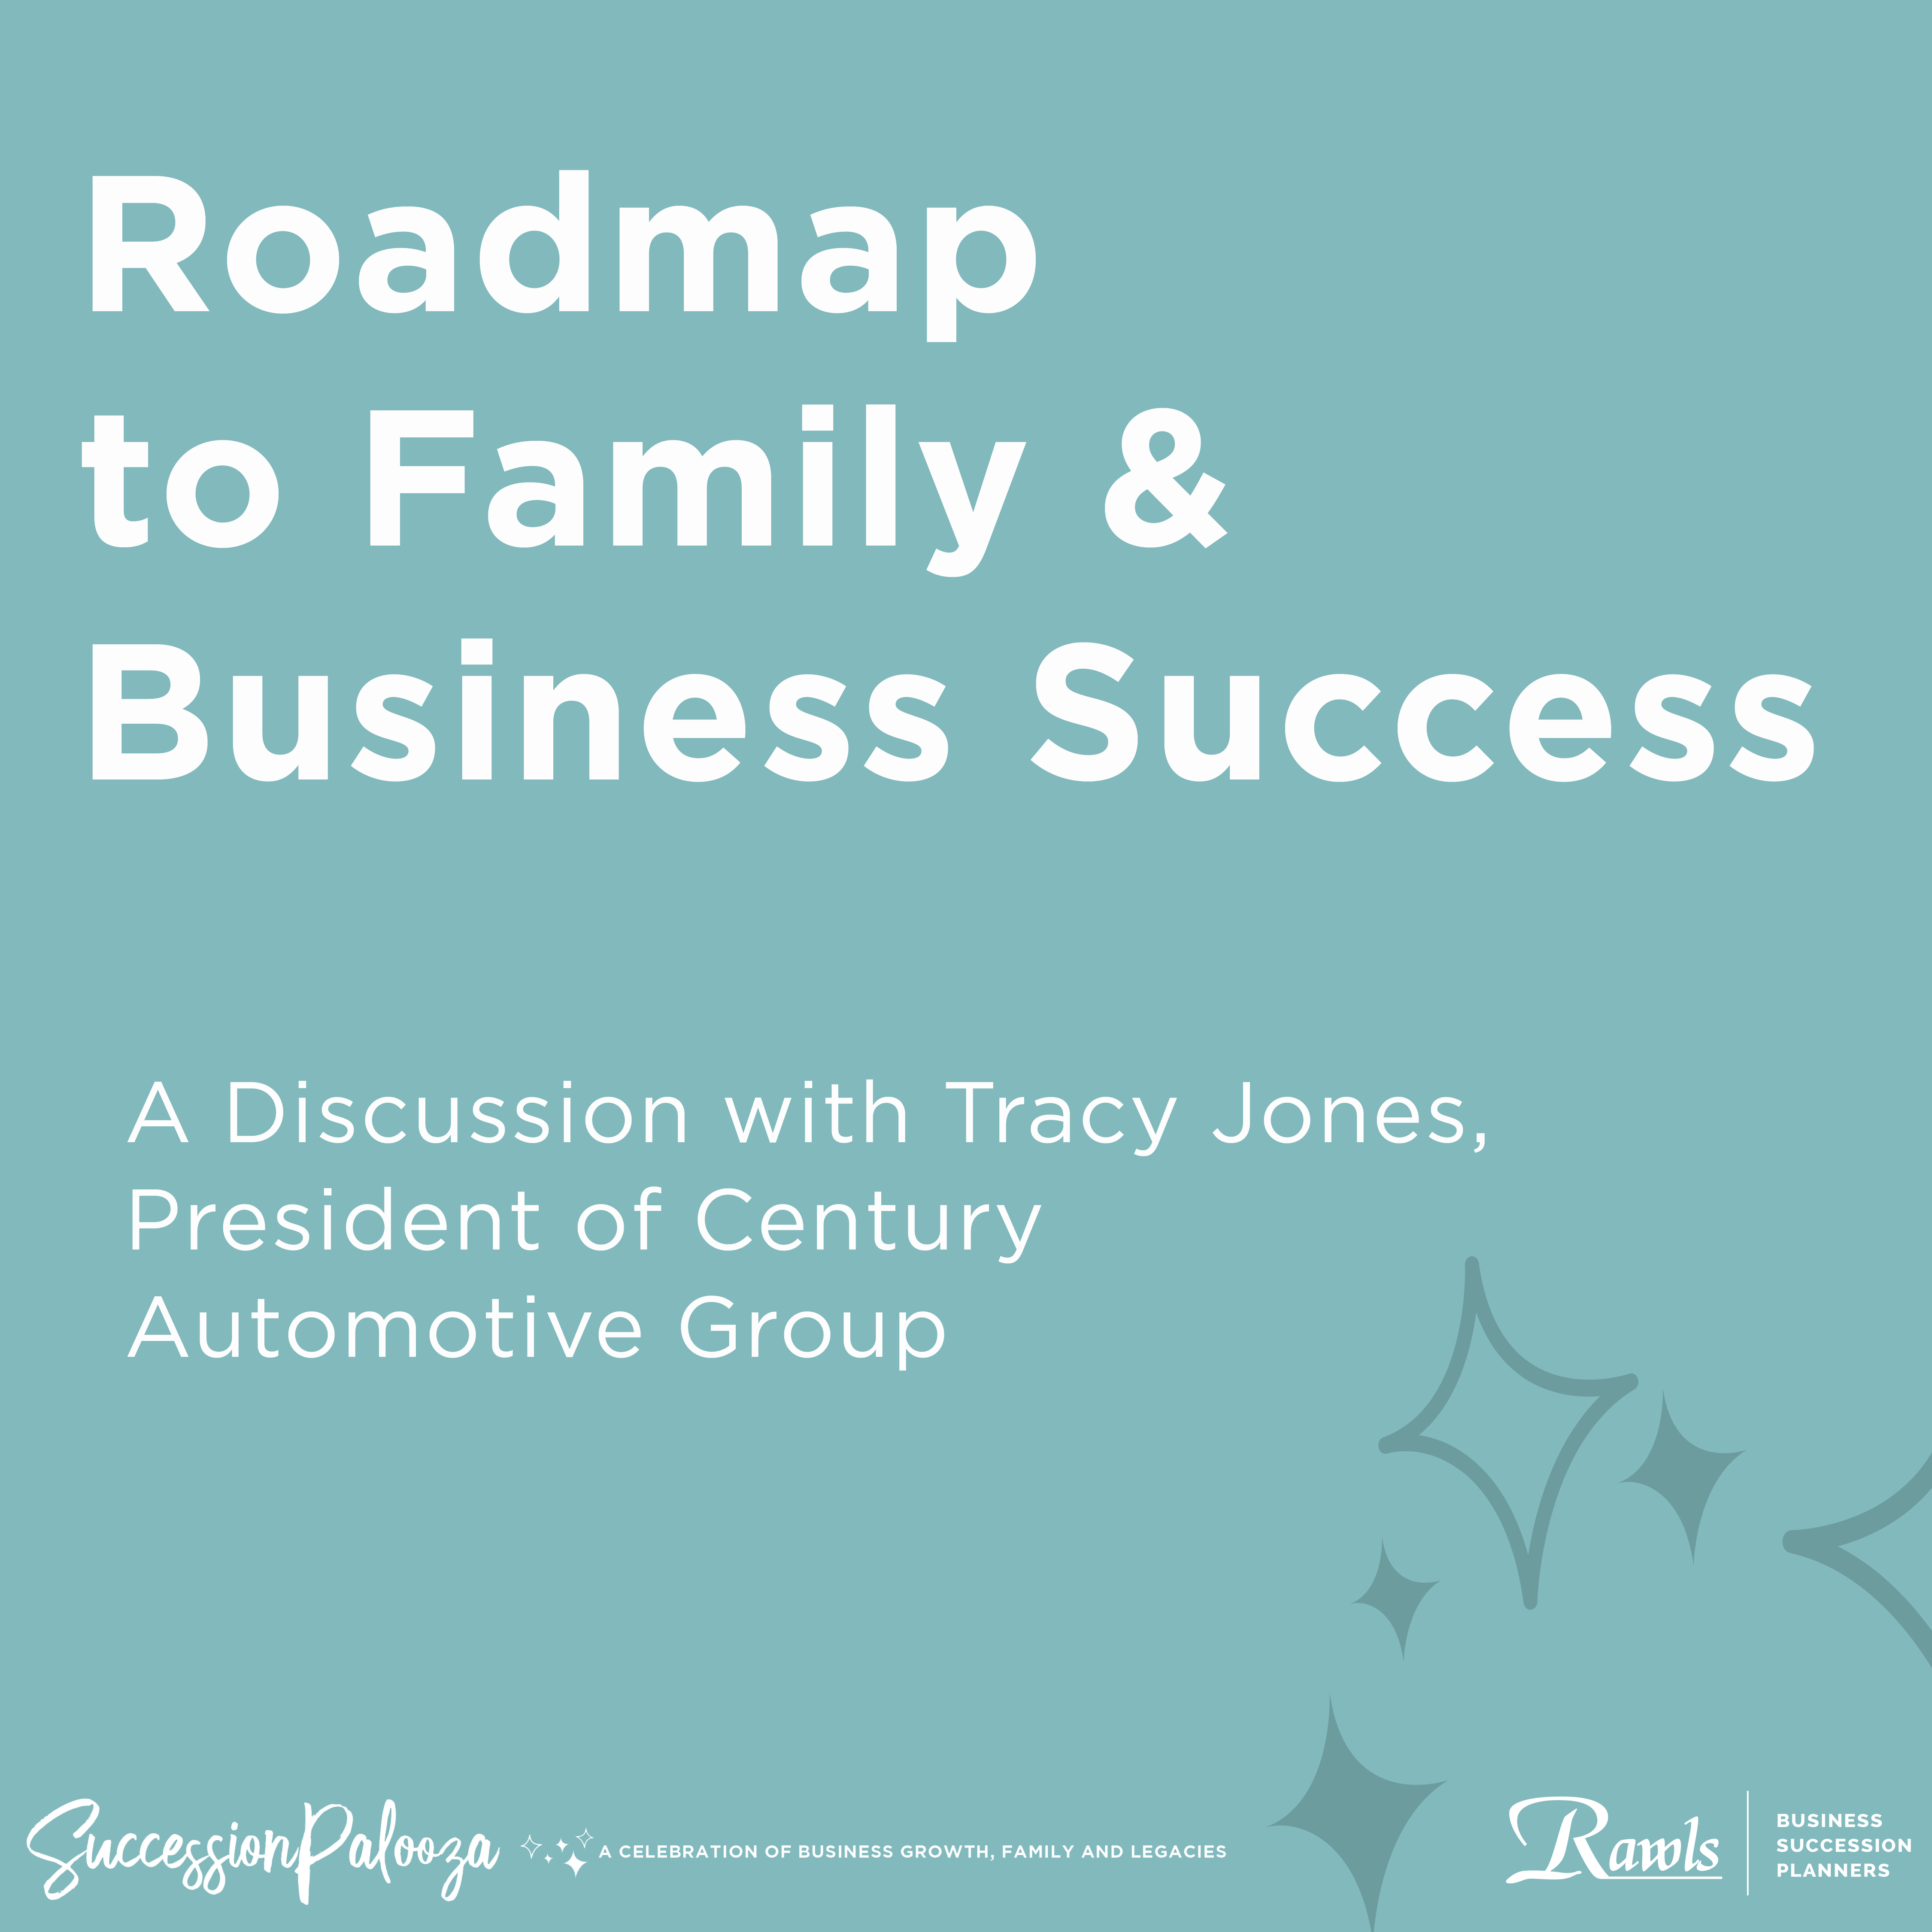 Roadmap to Family & Business Success